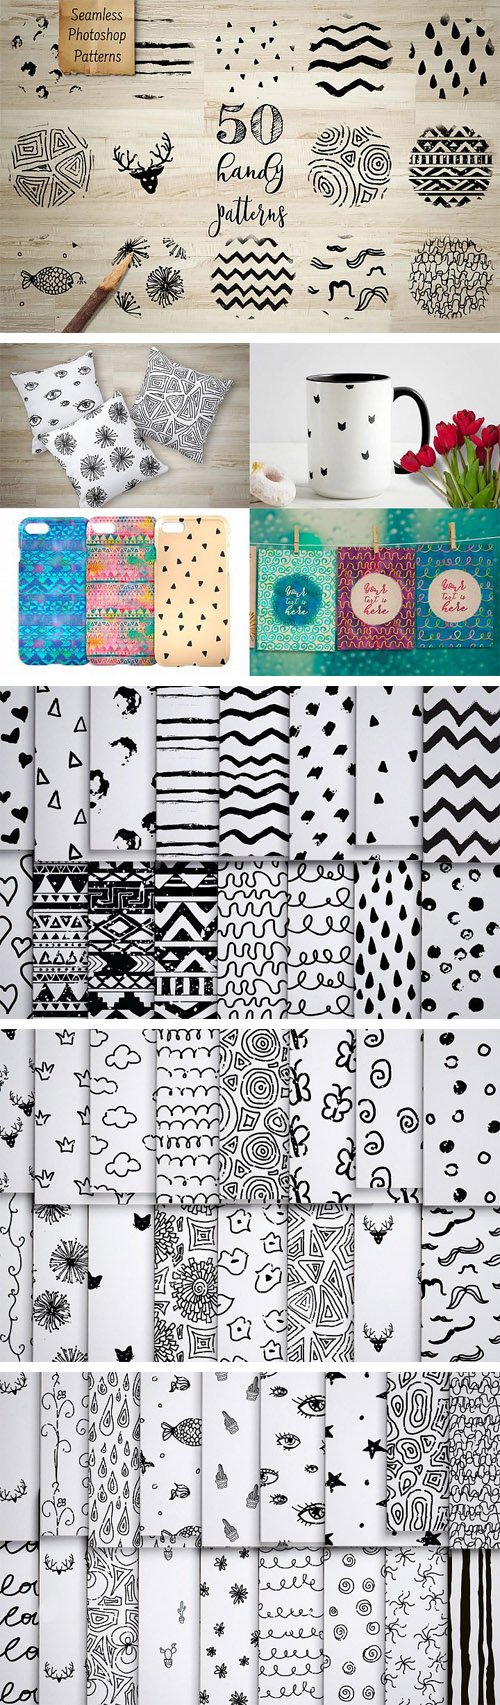 50 Hand-drawn Patterns for Photoshop